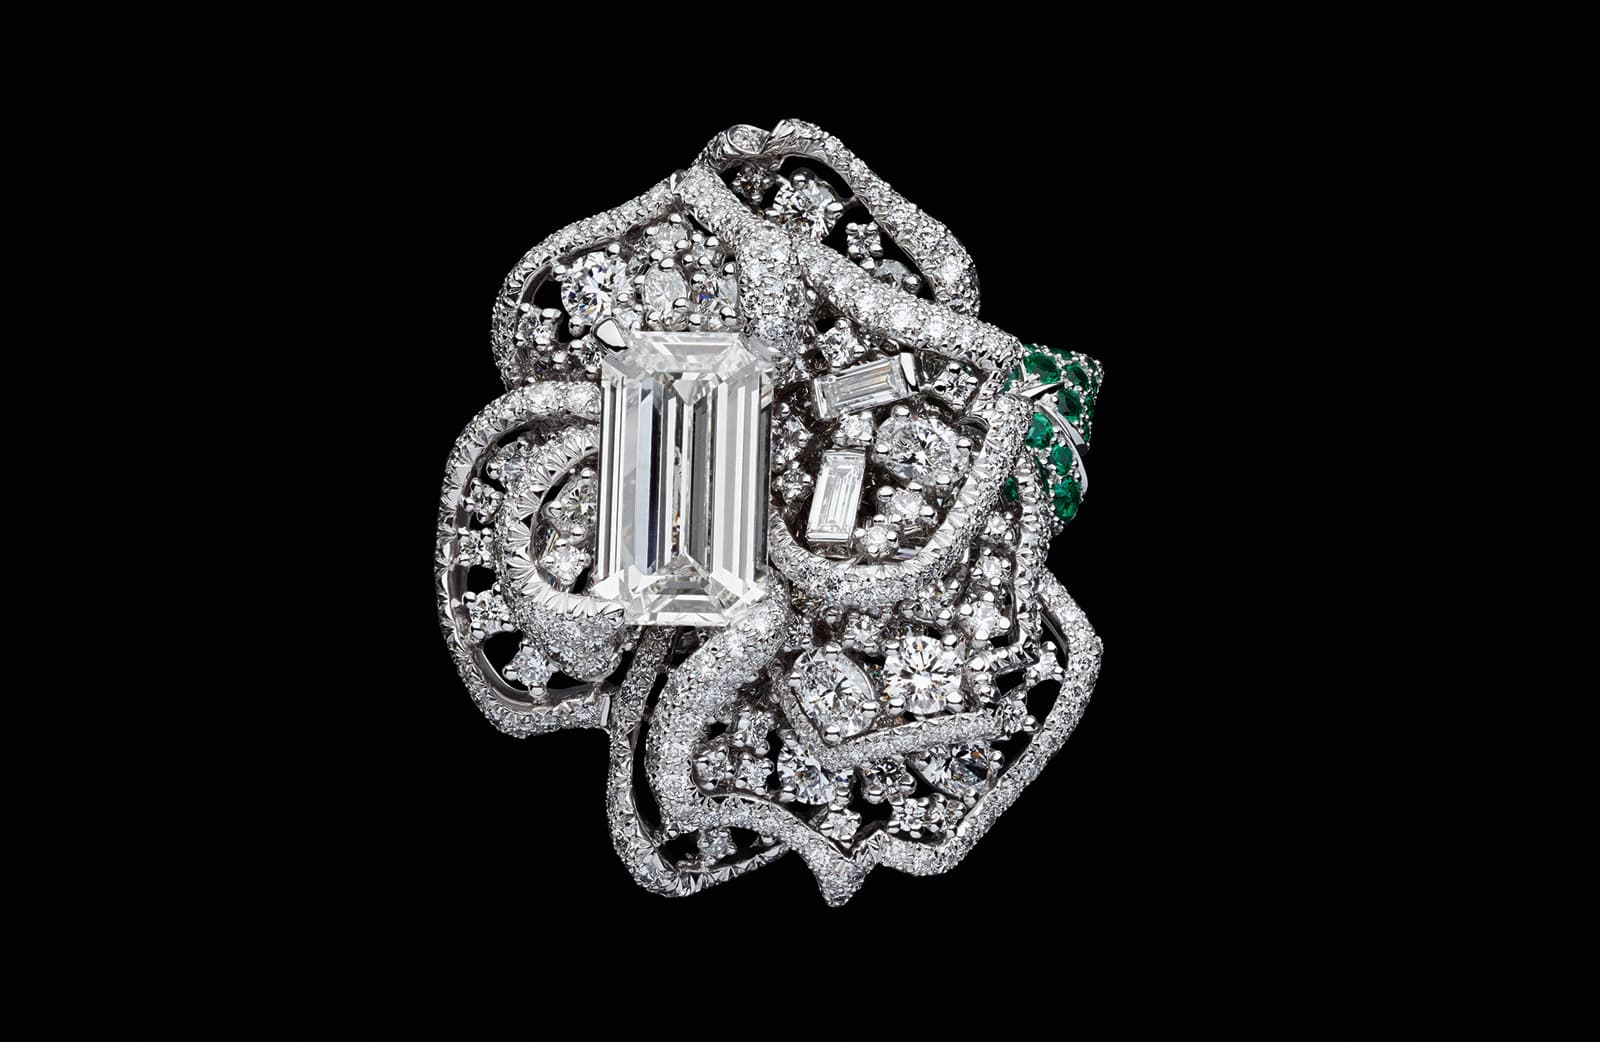 RoseDior ring in white gold with 3.29 cts emerald cut diamond, diamonds and emeralds